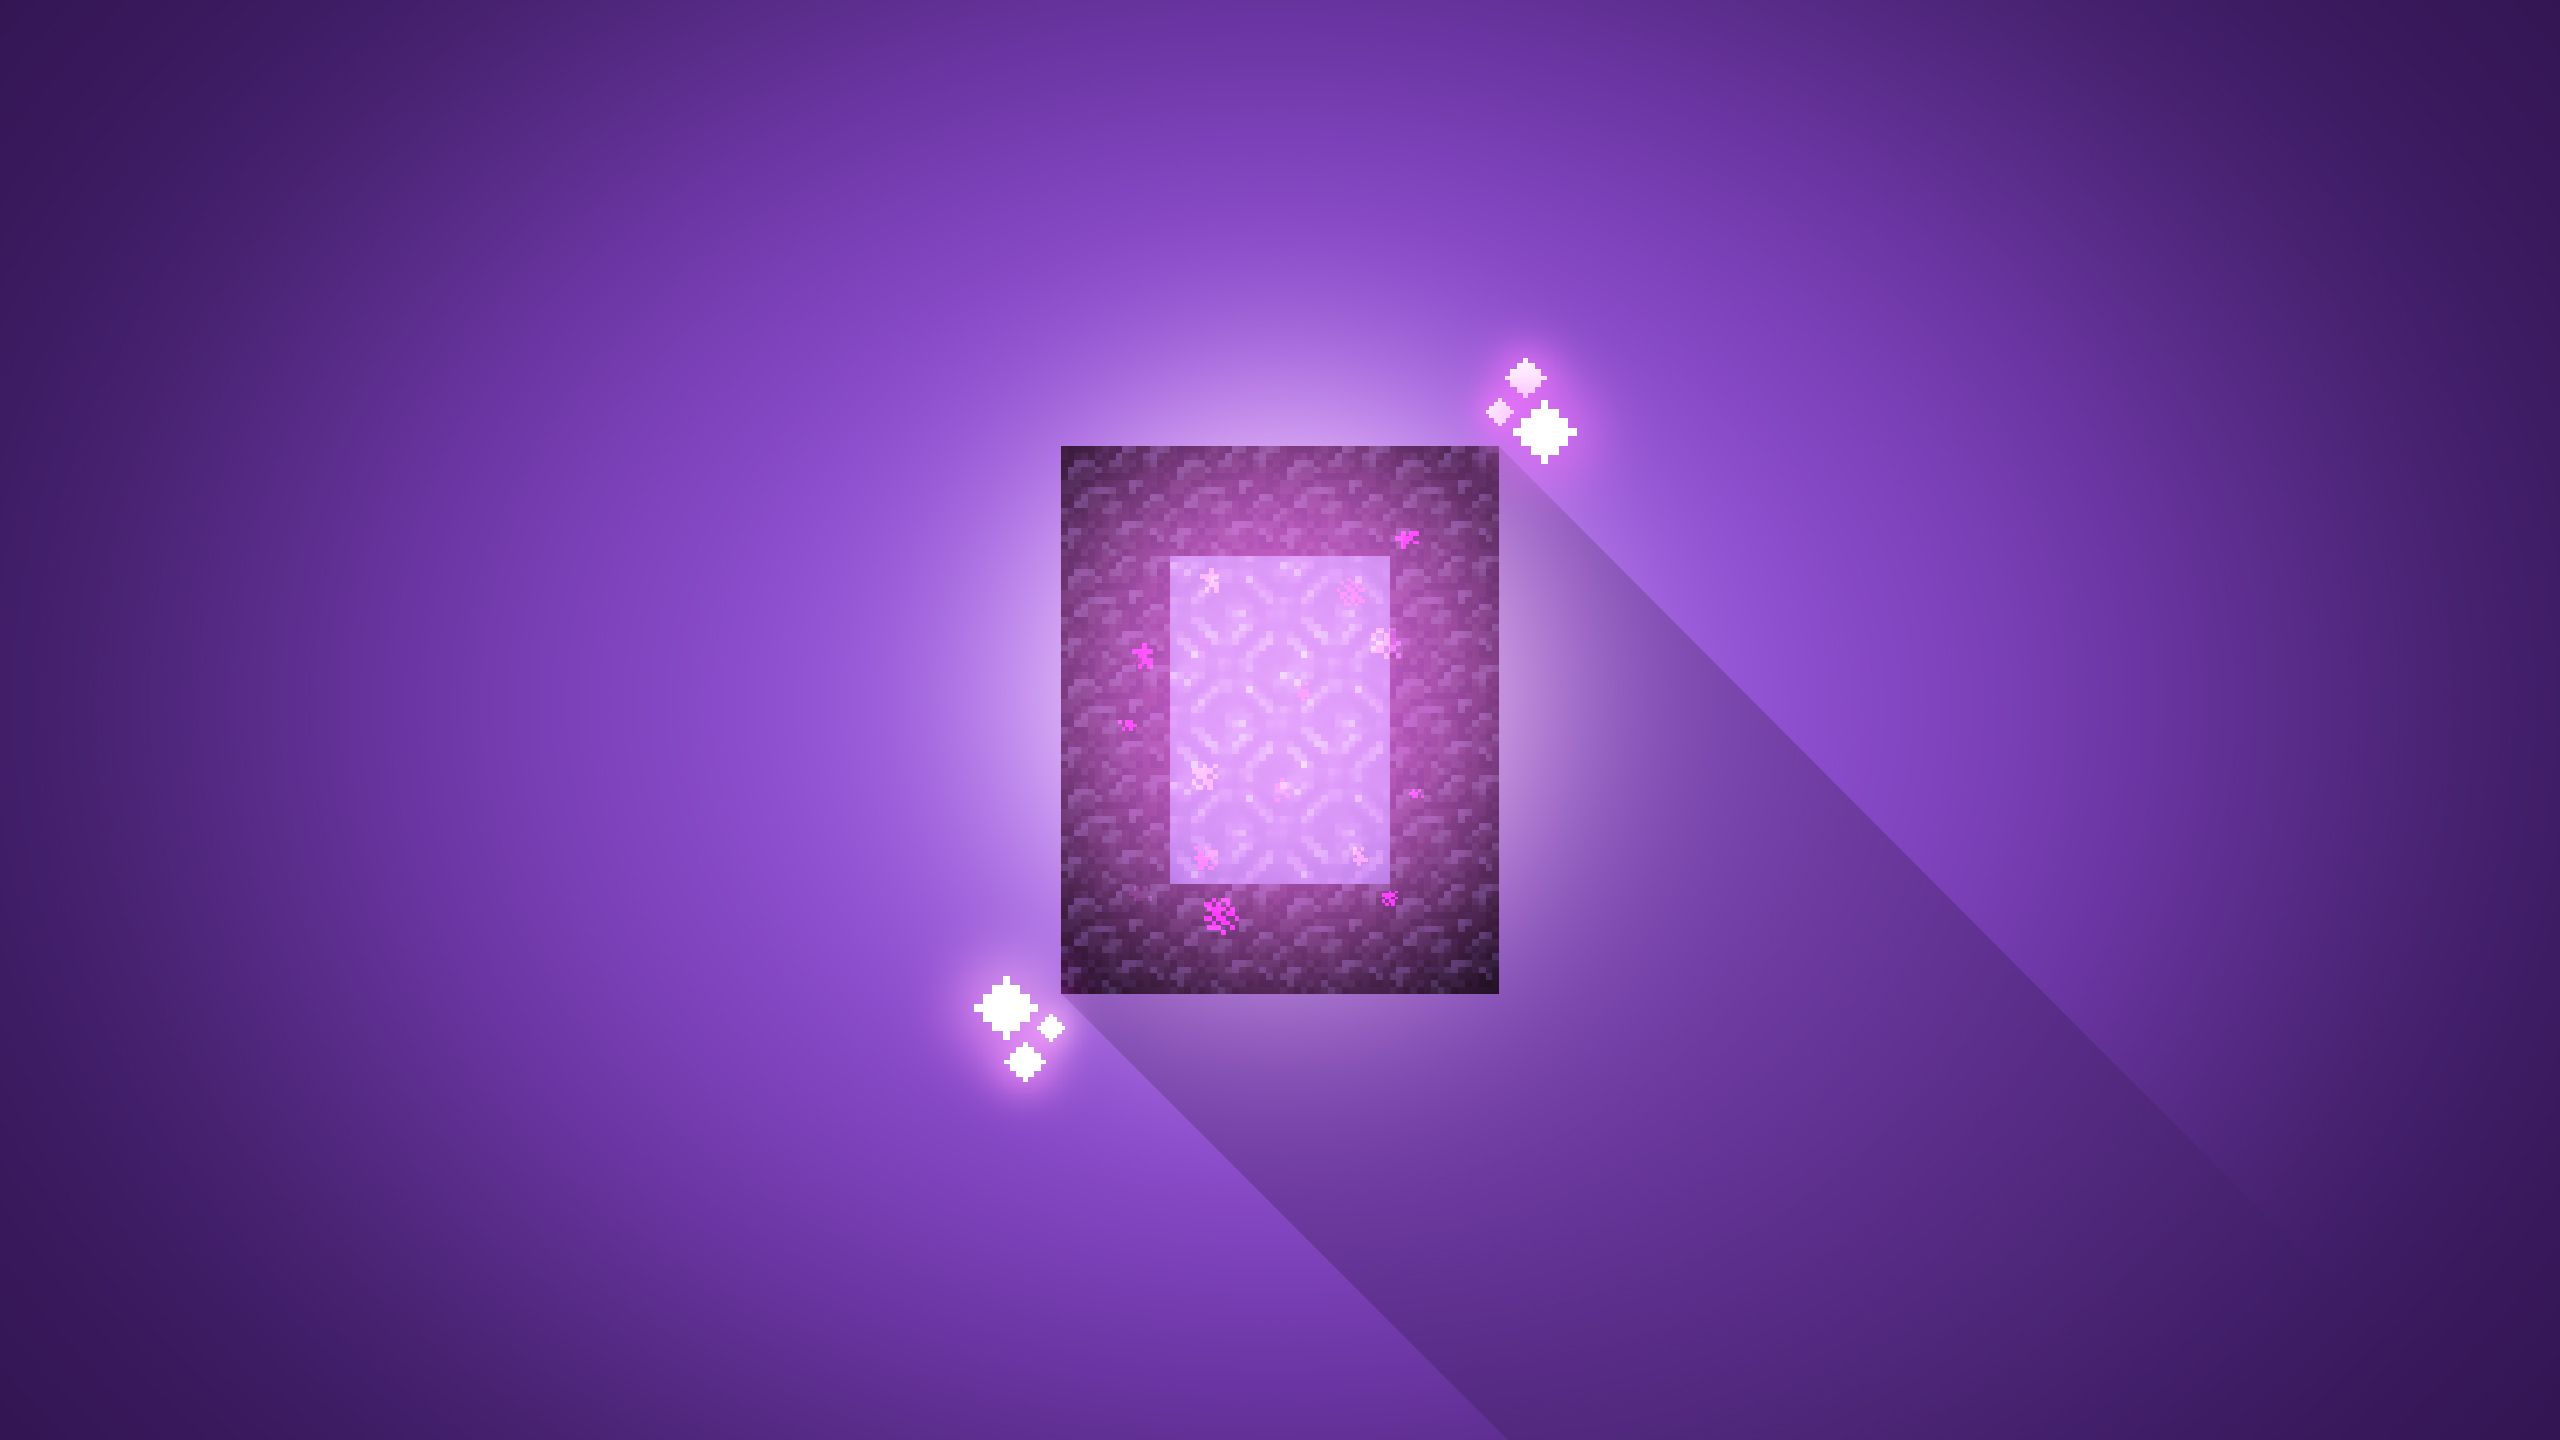 Nether Portal Live Wallpaper  APK Download for Android  Aptoide